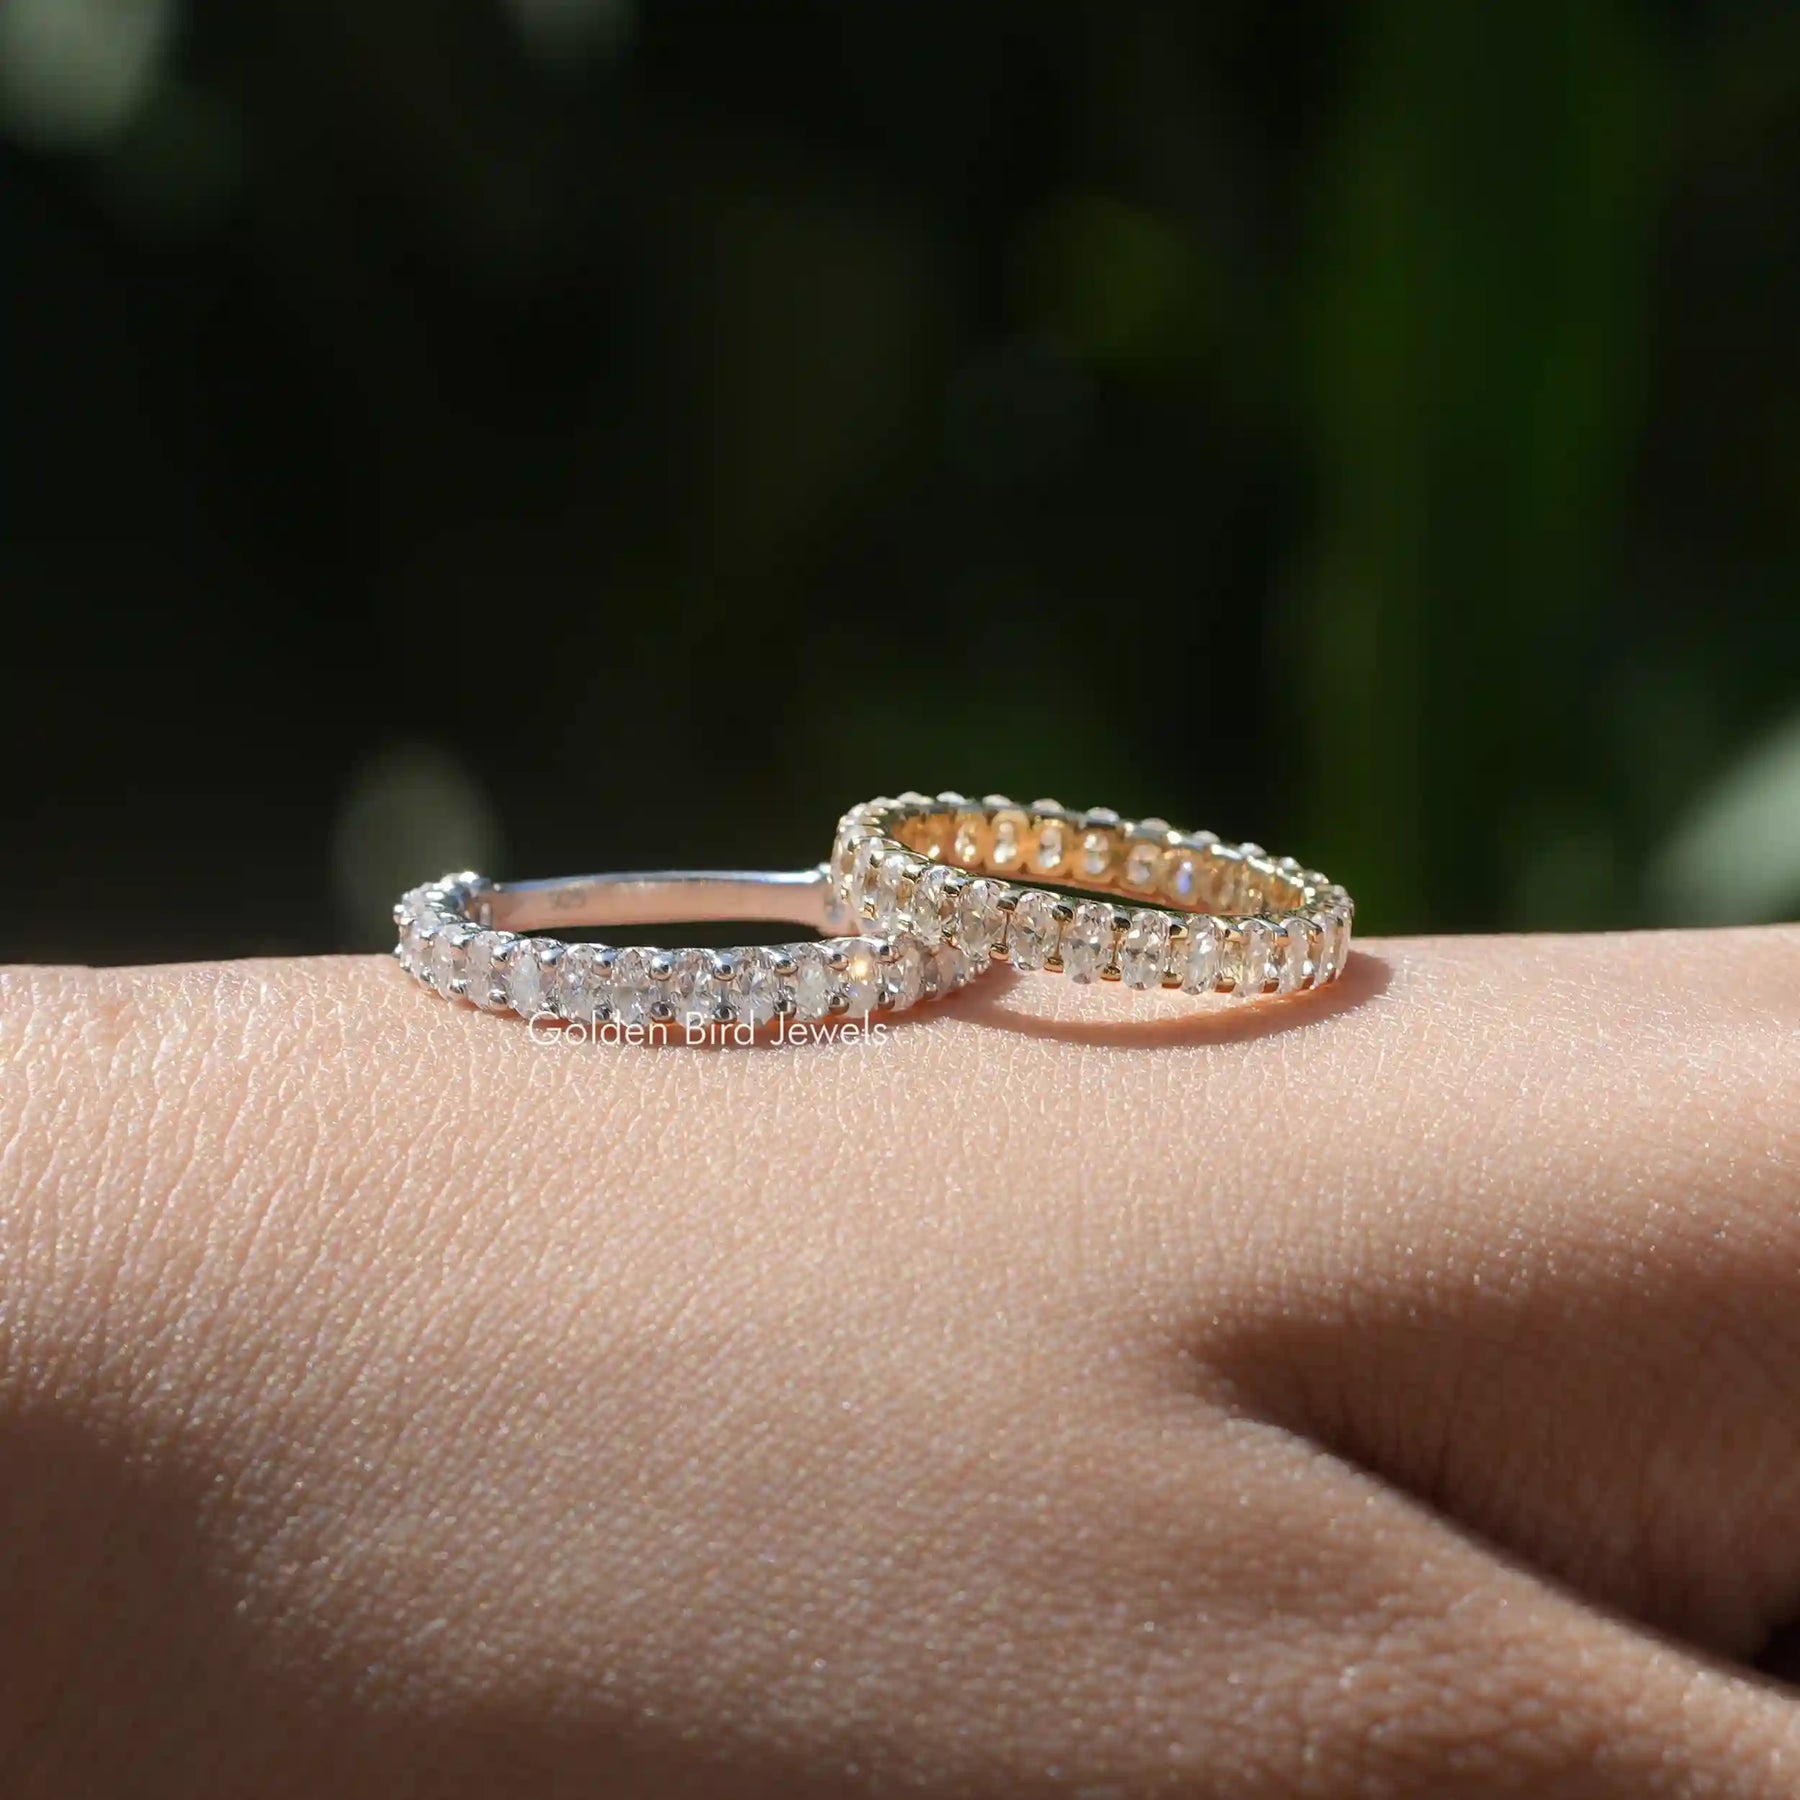 [This wedding matching band crafted in prong setting]-[Golden Bird Jewels]